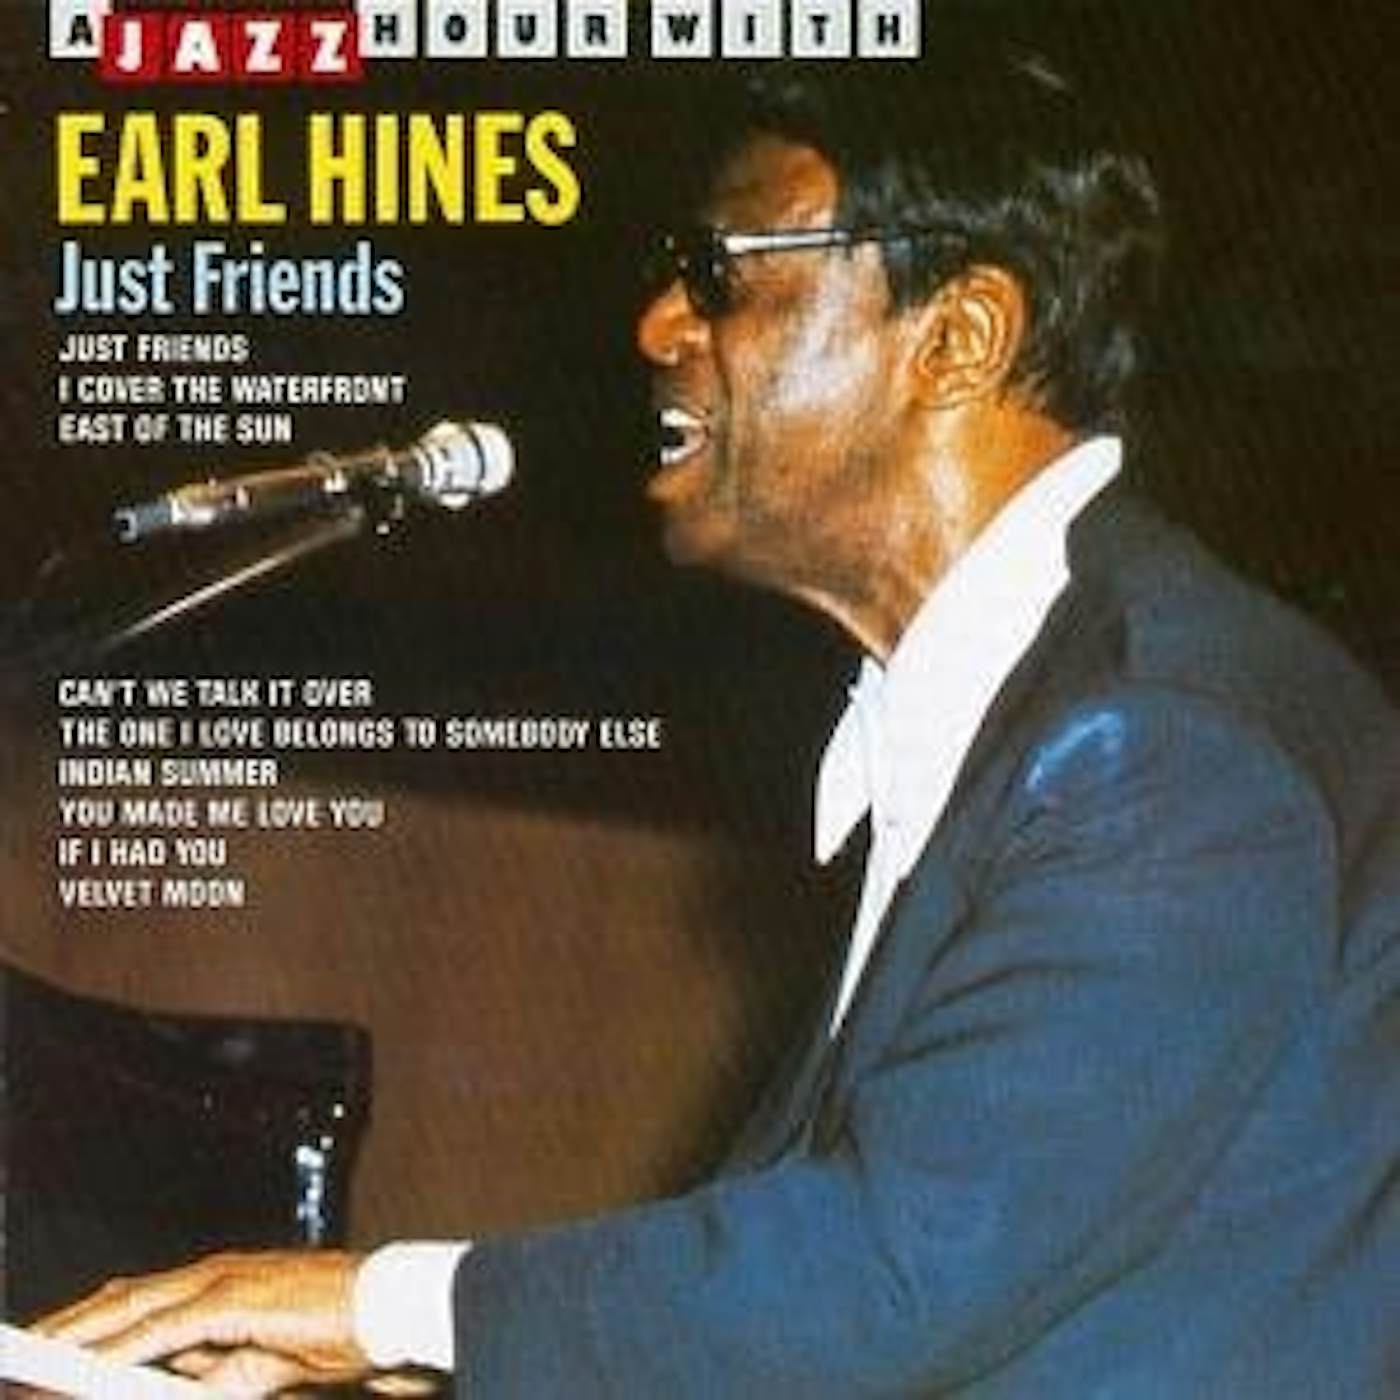 Earl Hines JUST FRIENDS CD